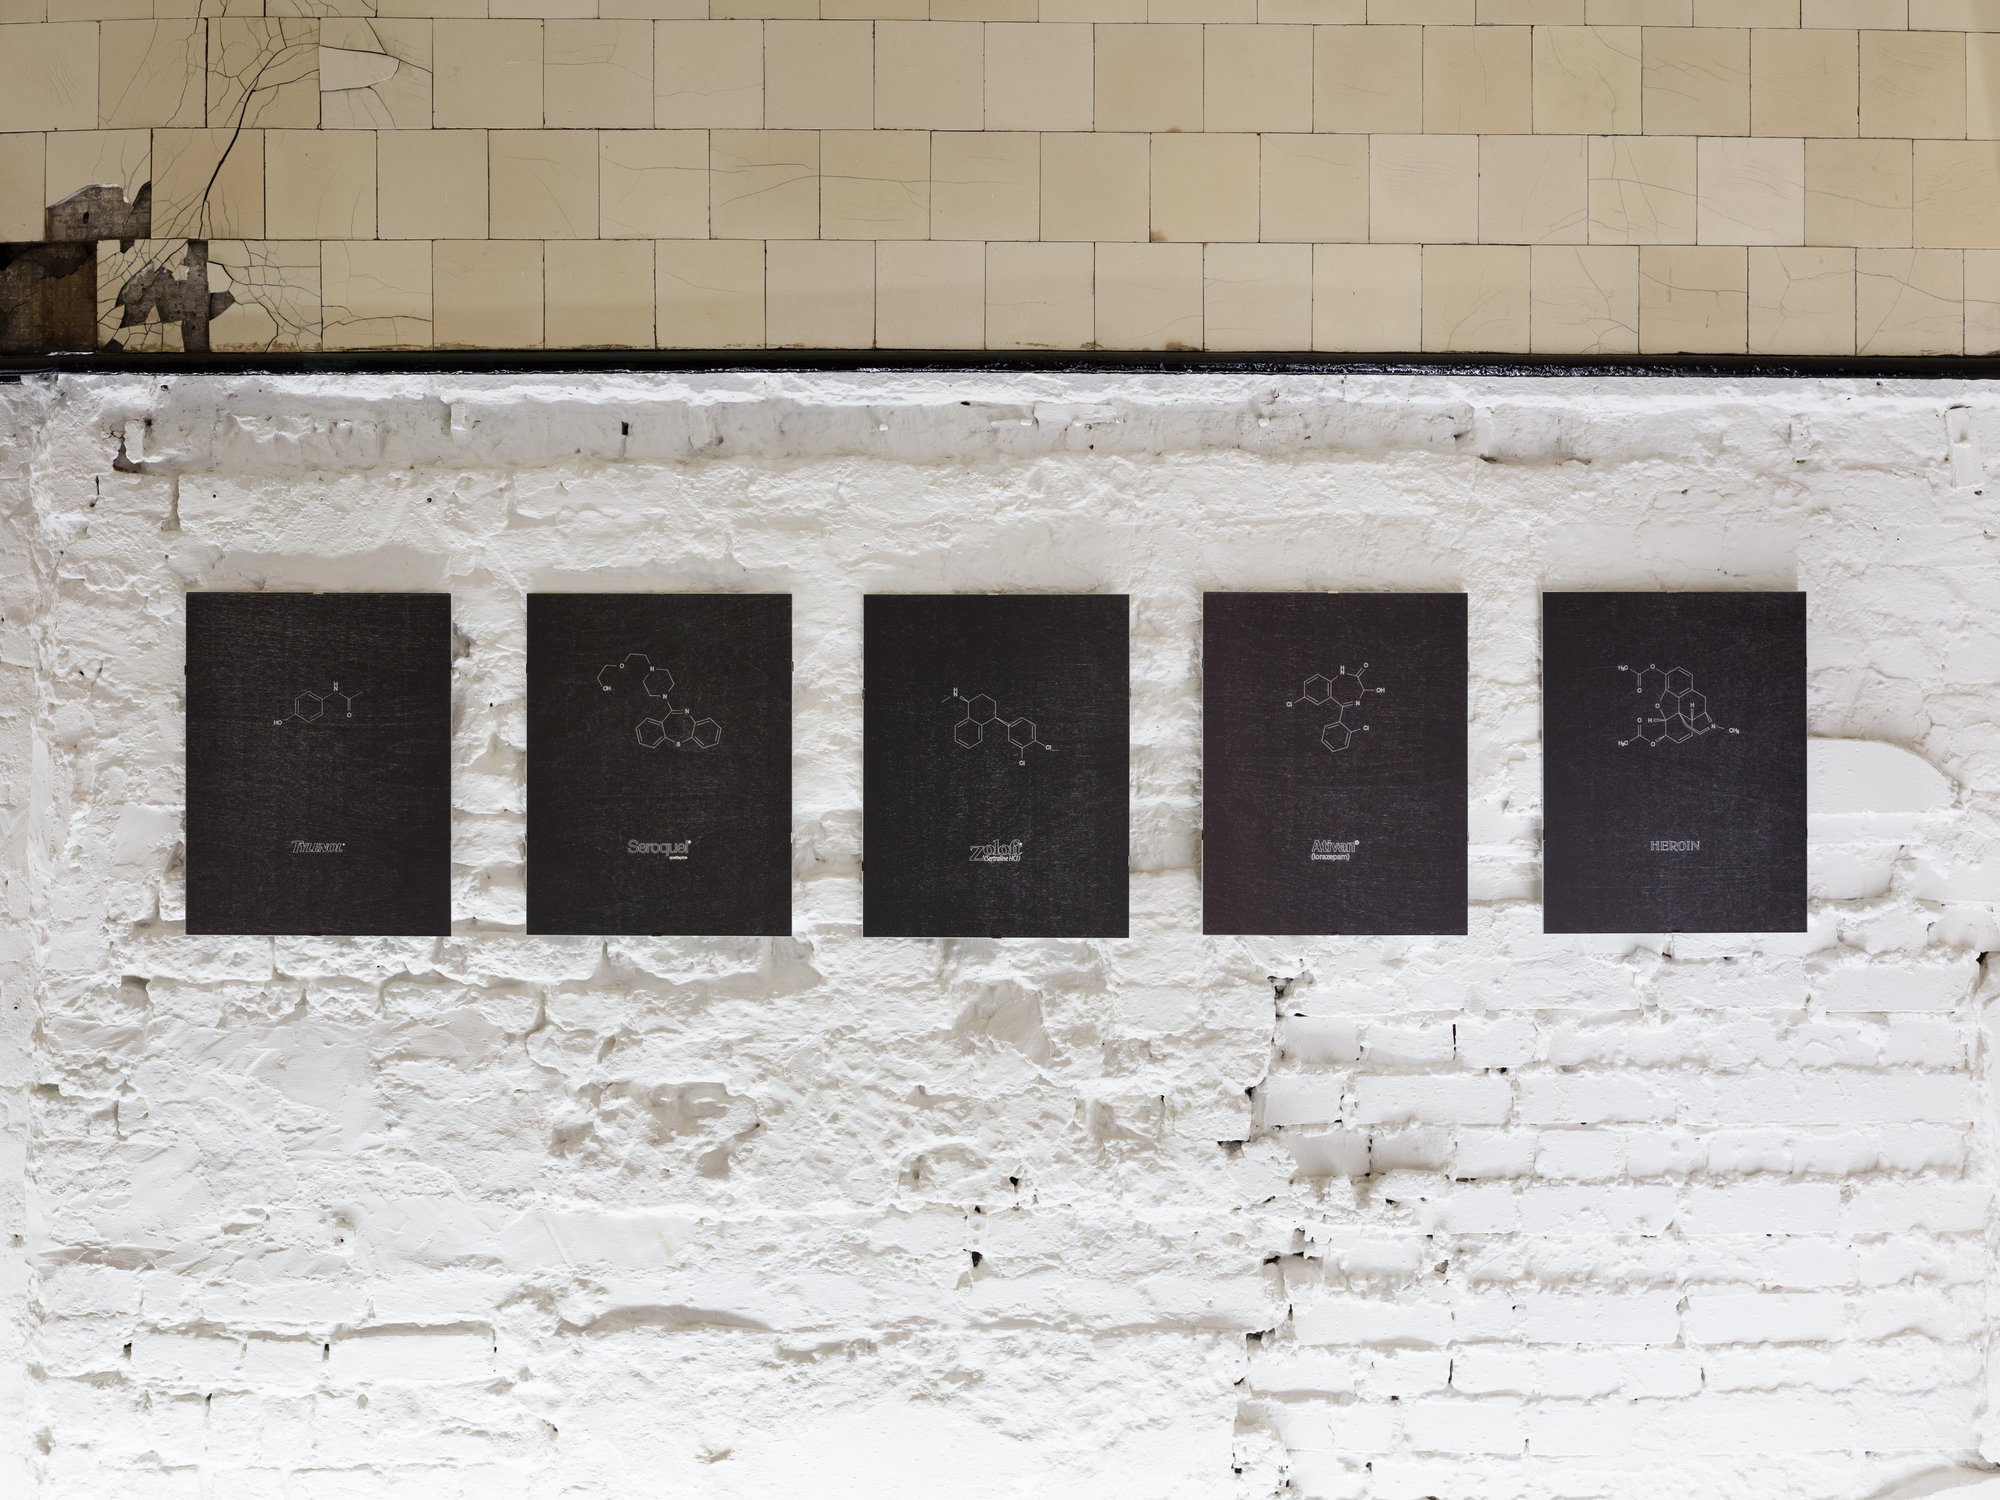 Sidsel Meineche Hansen, Toxic Institution (1-5), laser woodcut on paper, mounted on aluminium under museum glass, 47 x 36.5 cm each (18 1/2 x 14 3/8 in each), 2014